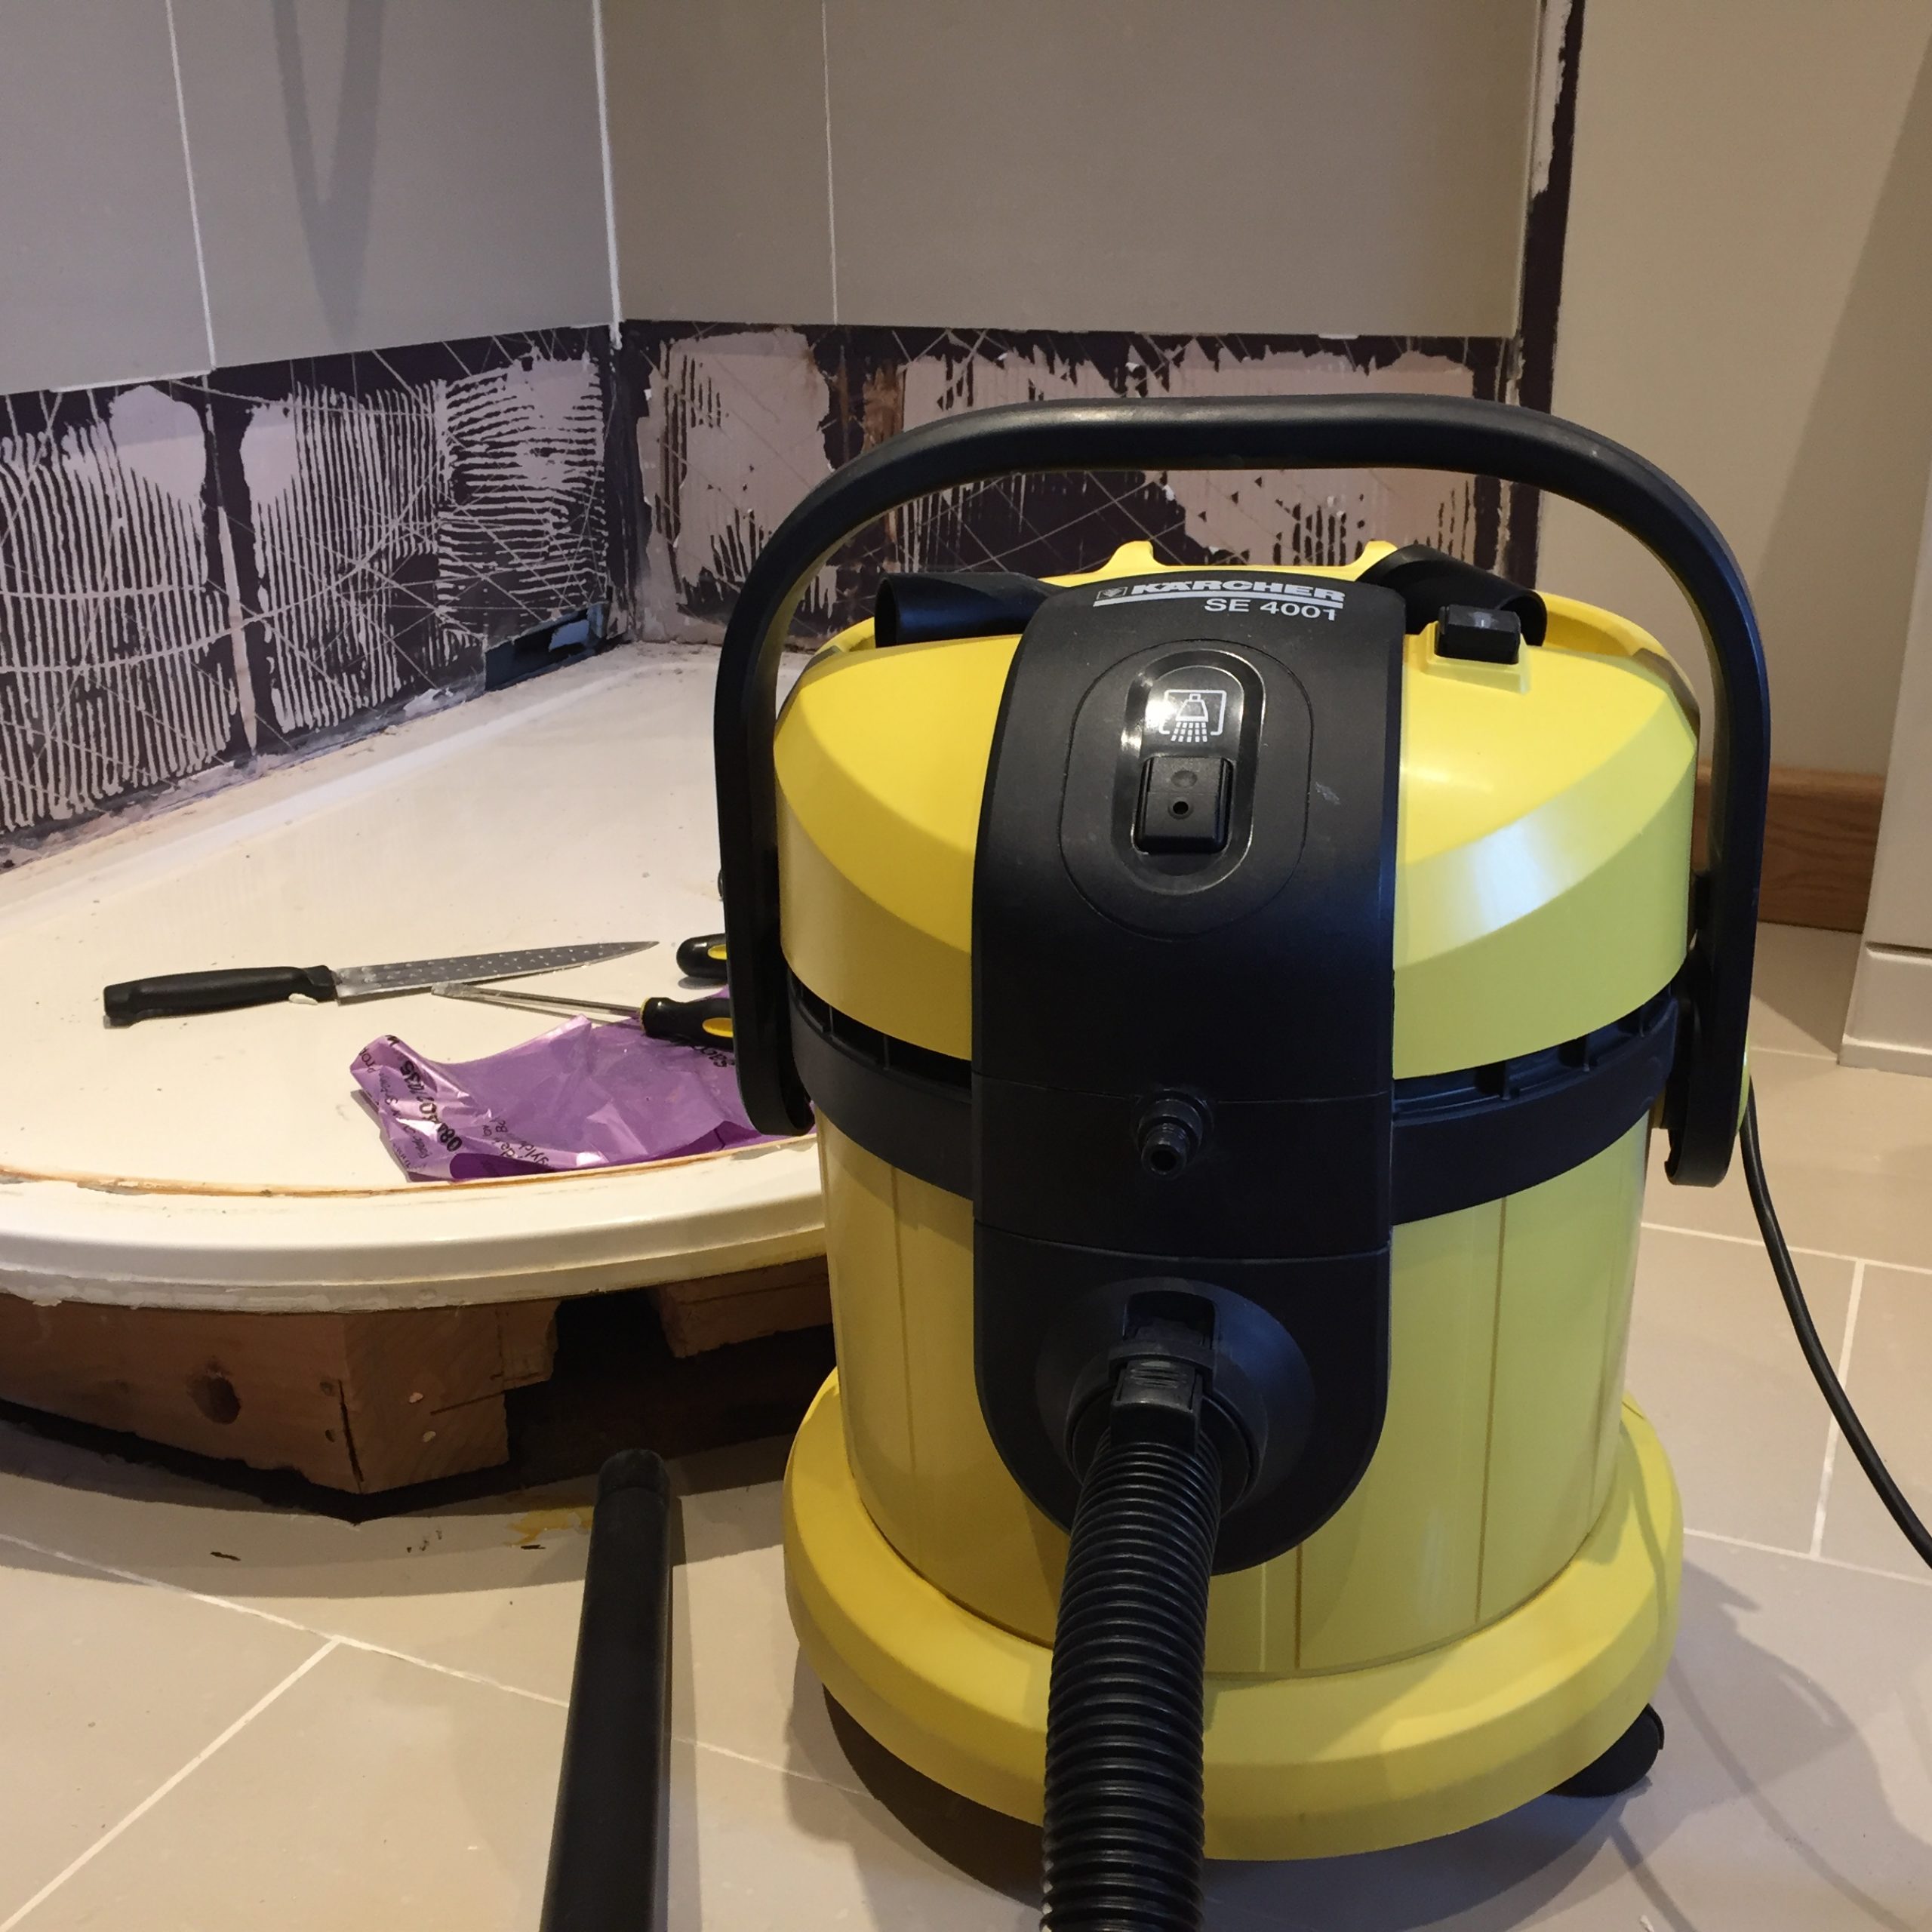 Karcher SE 4001 Spray Extraction Cleaner (Wet & Dry)